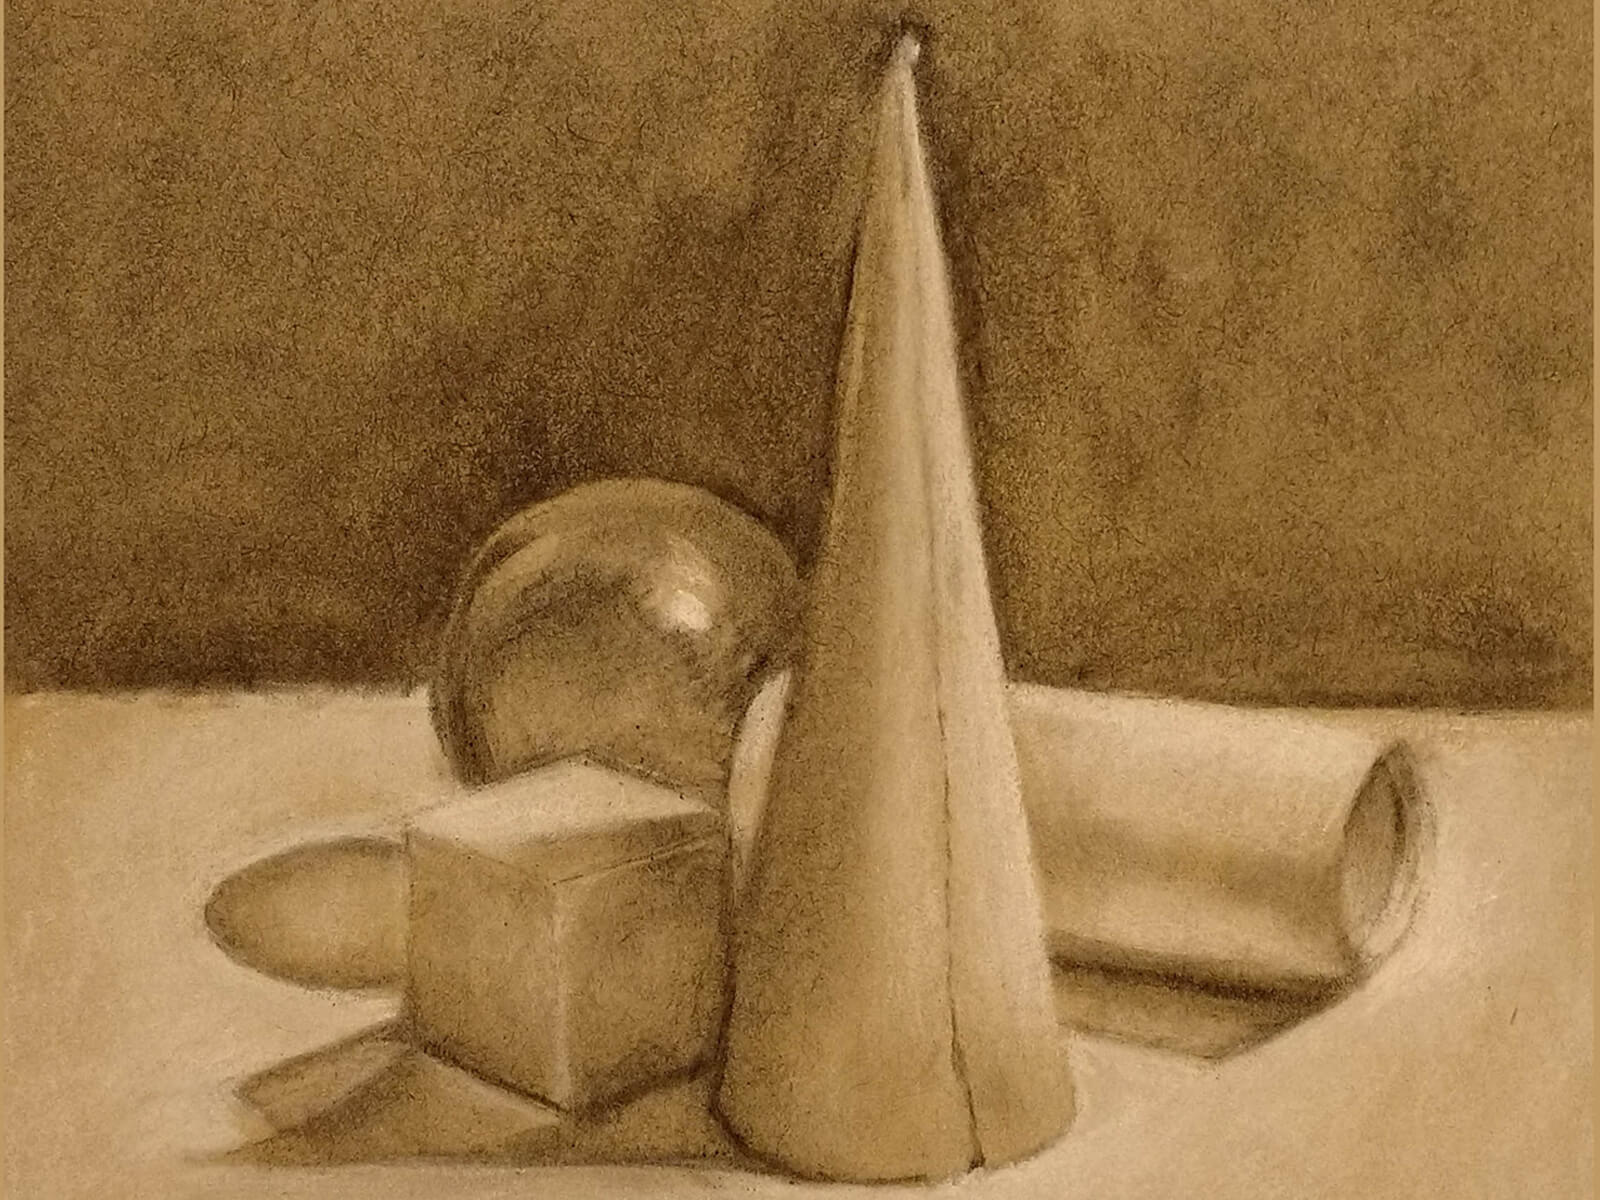 still-life, monochromatic drawing of a shiny ball and blocks in various geometric shapes